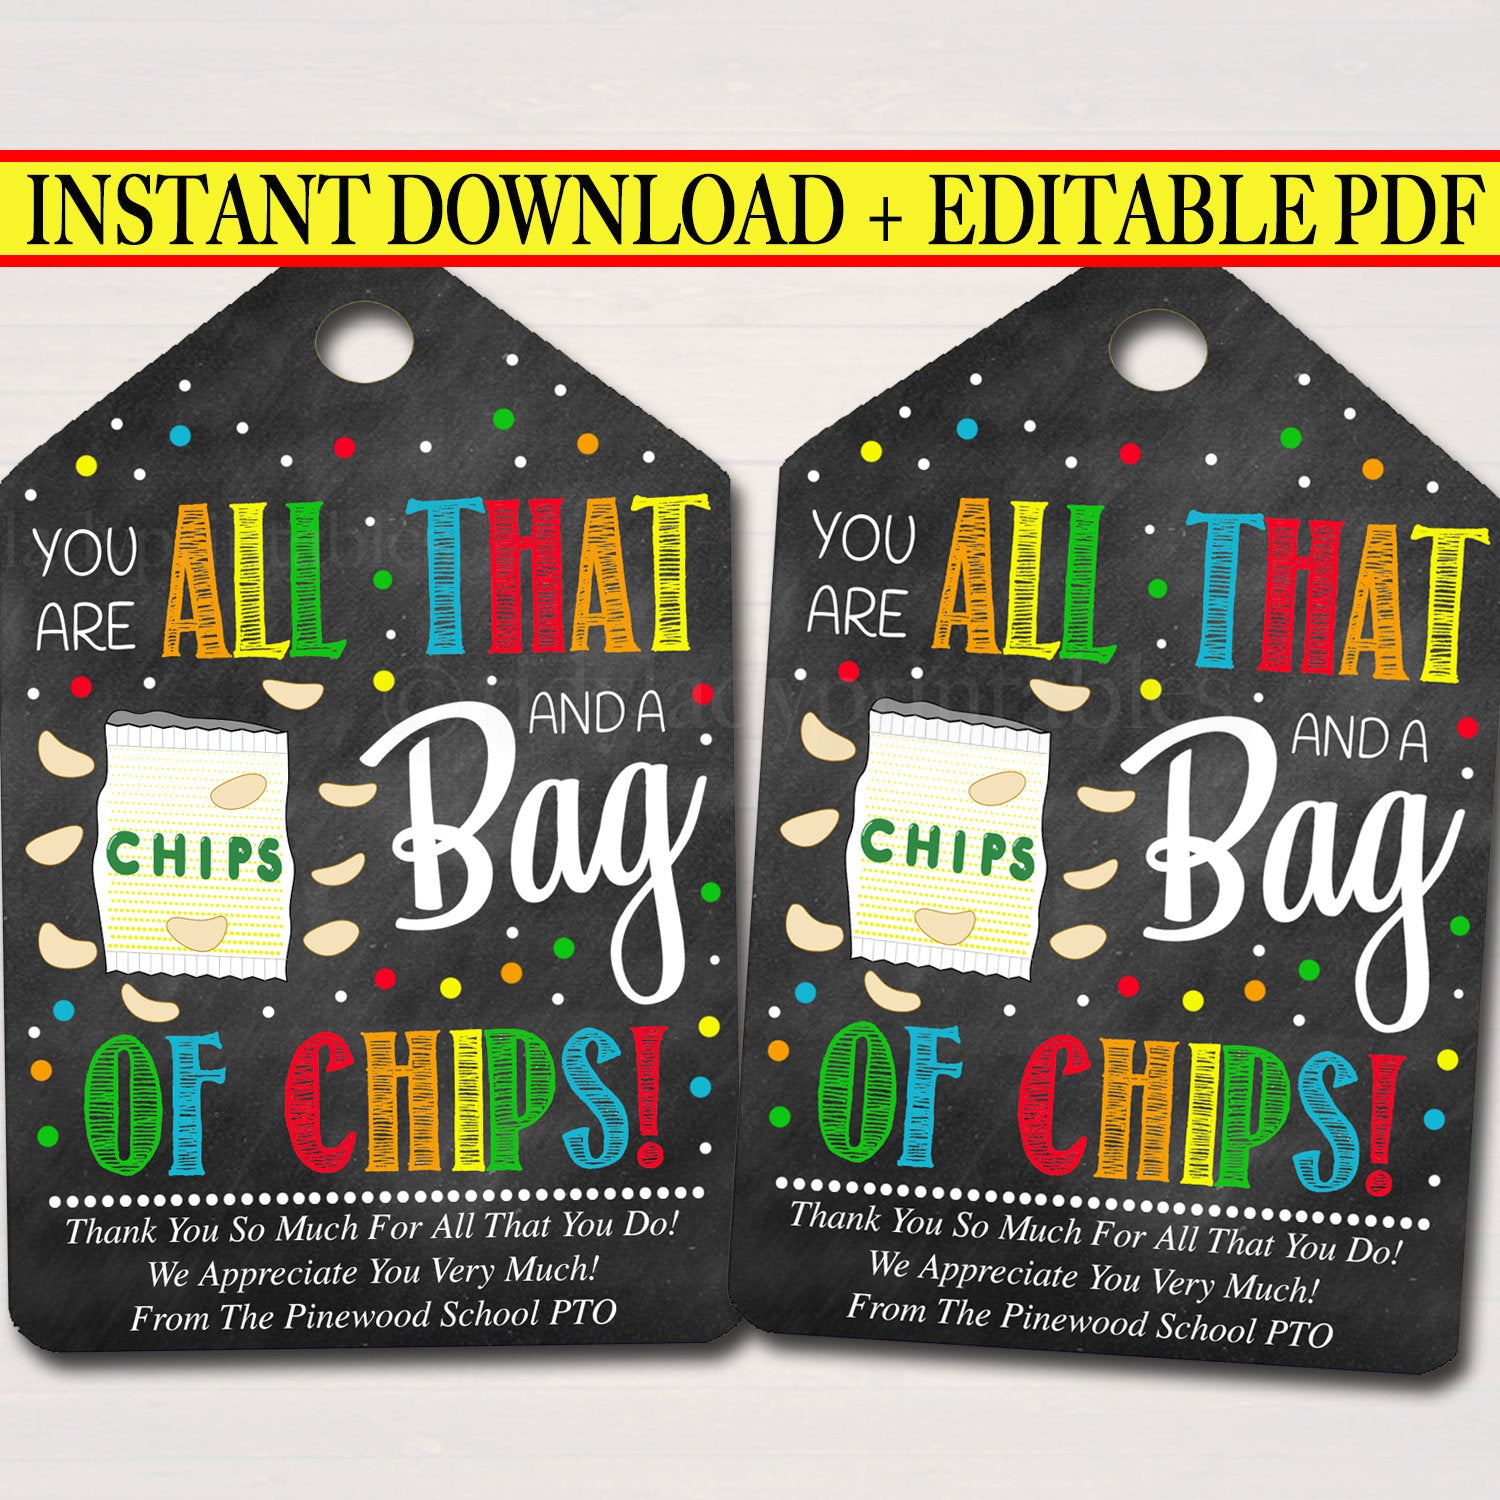 All That and a Bag Chips Appreciation Printable Tag — TidyLady Printables